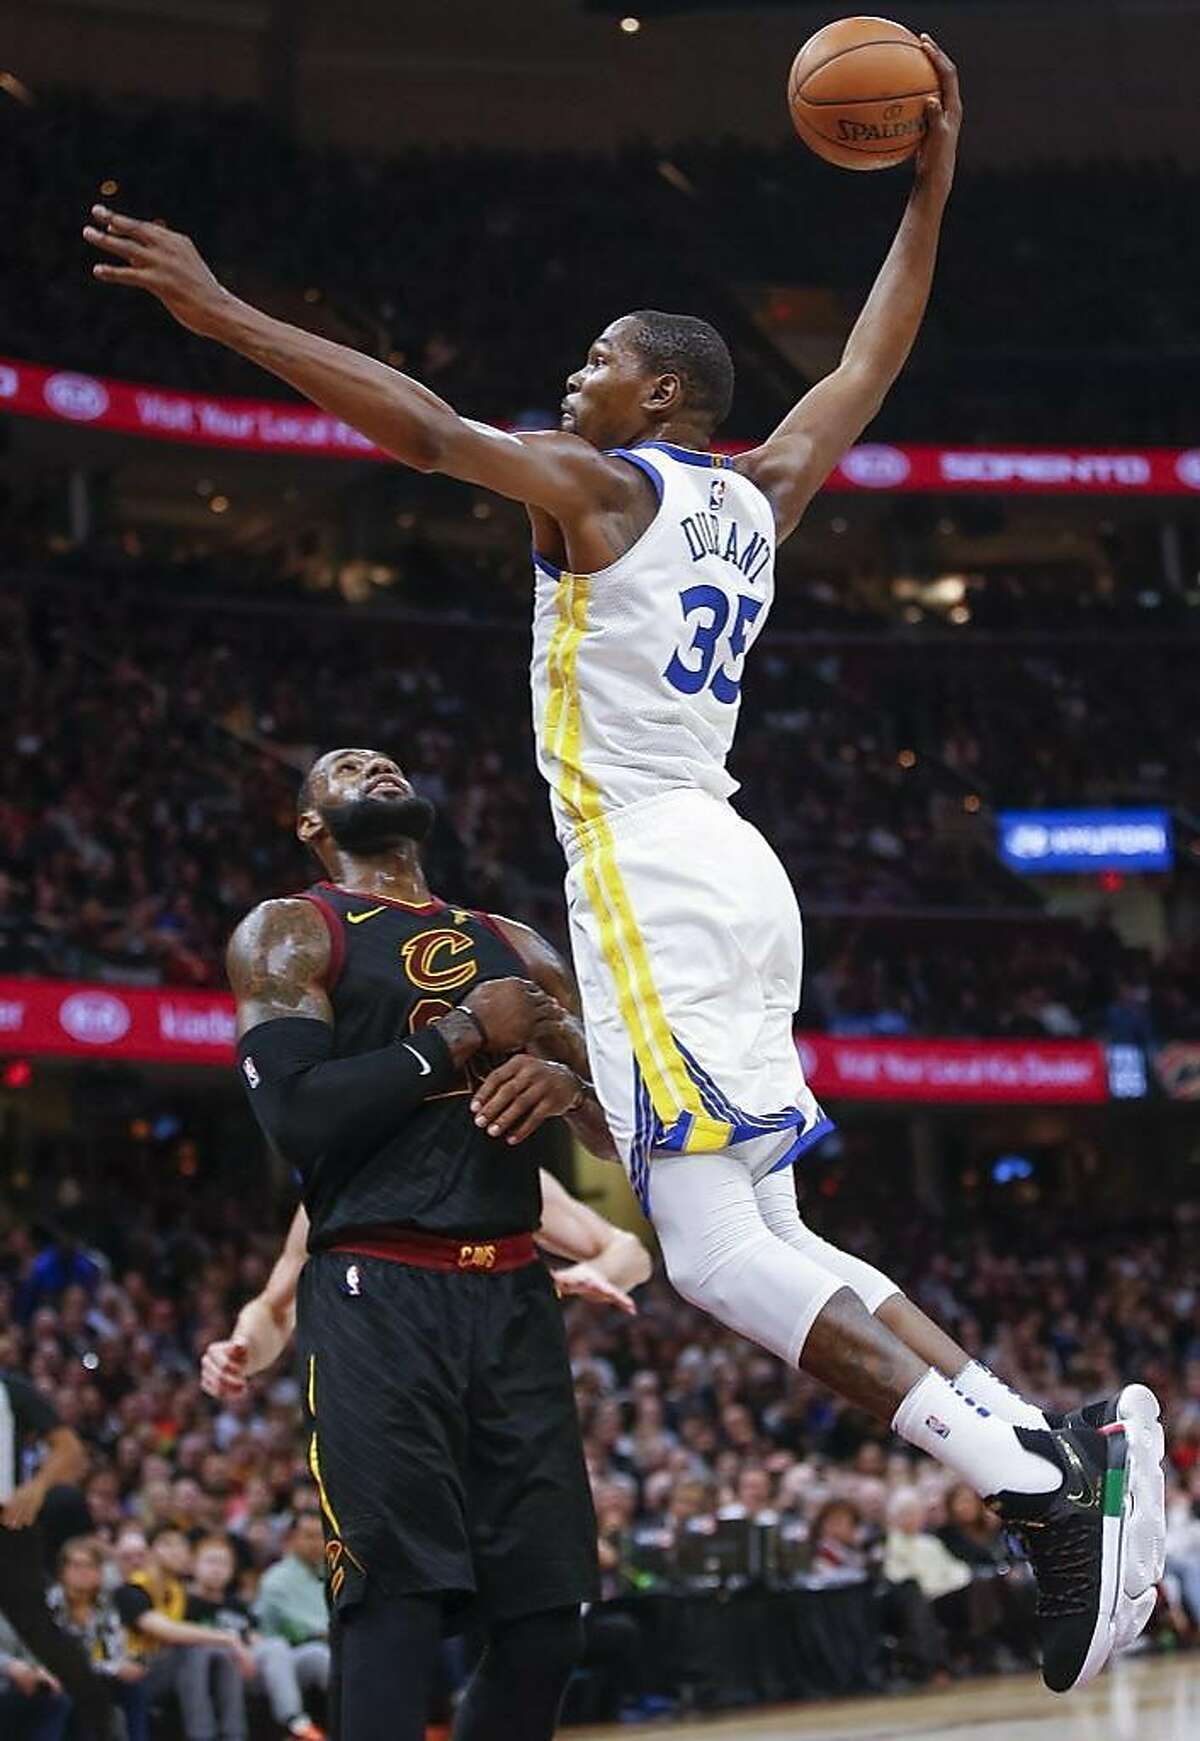 Kevin Durant of the Golden State Warriors goes up for the dunk over LeBron James #23 of the Cleveland Cavaliers at Quicken Loans Arena on January 15, 2018 in Cleveland, Ohio. 